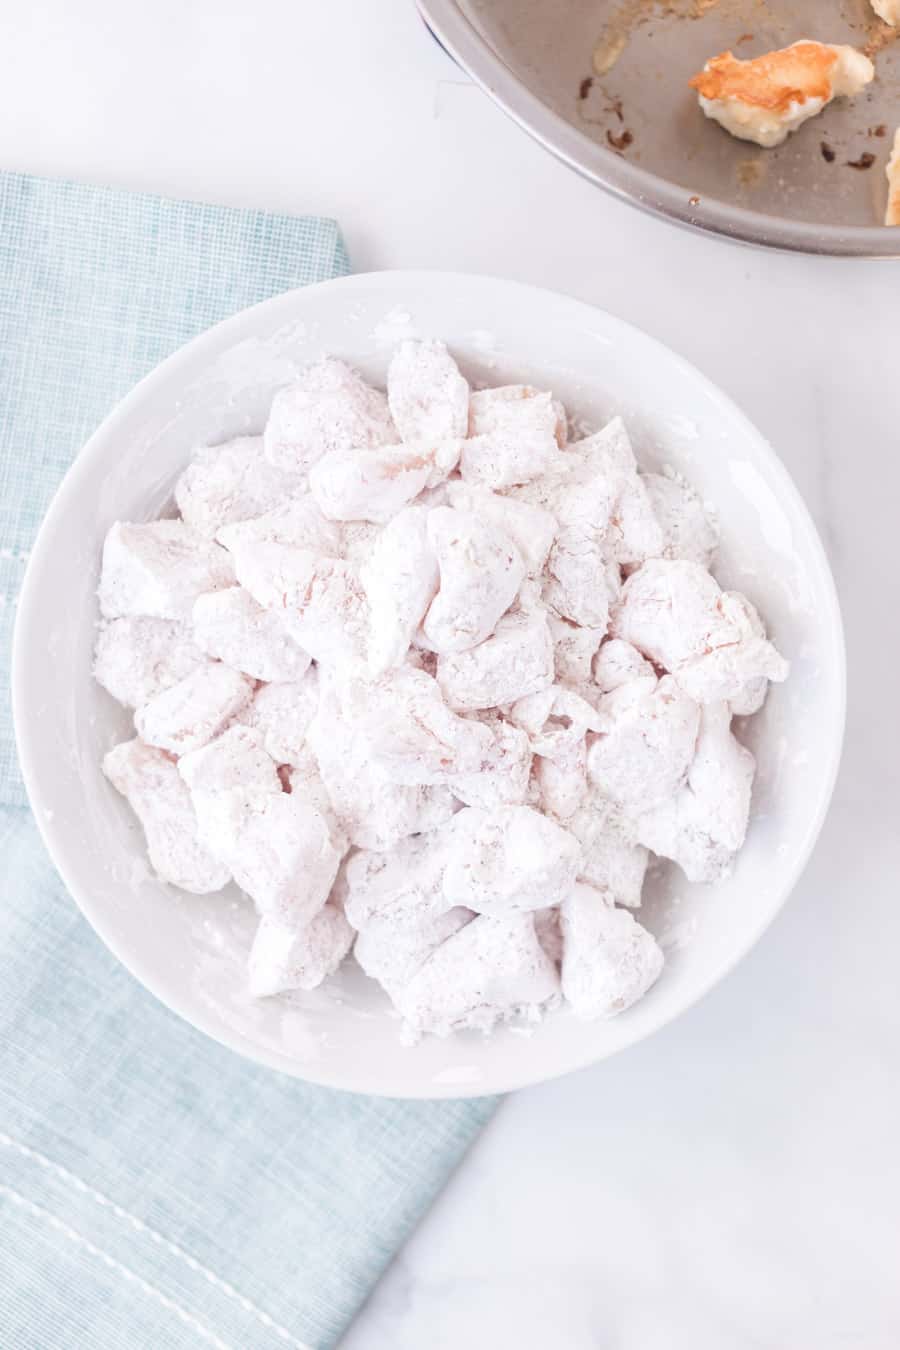 chicken pieces dusted in flour in a white bowl.